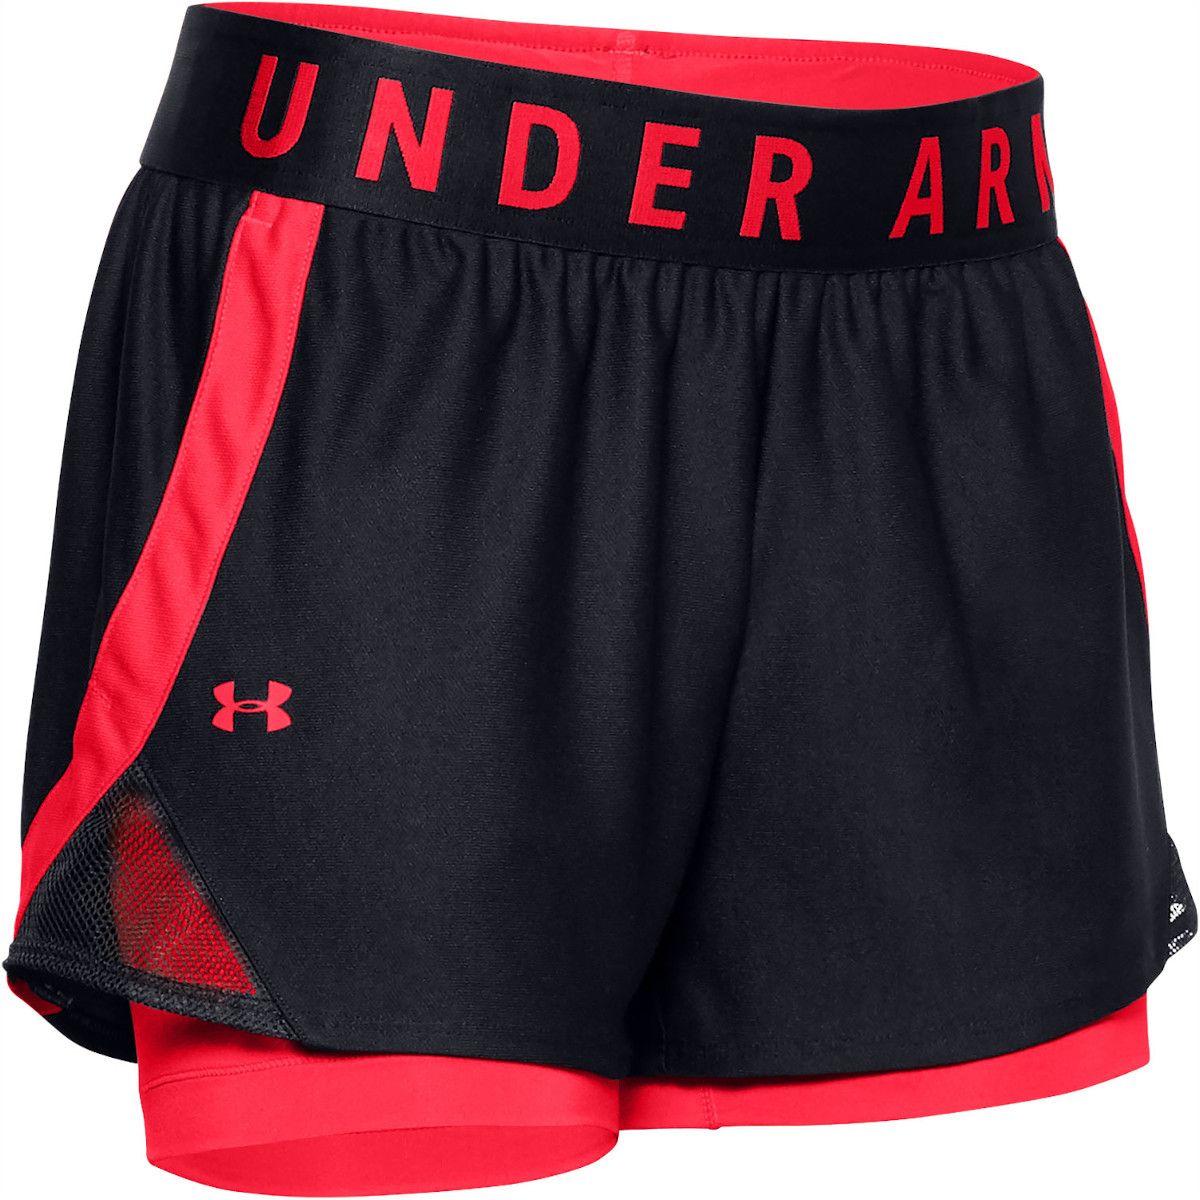 Under Armour Play Up 2 in 1 Women's Shorts 1351981-002